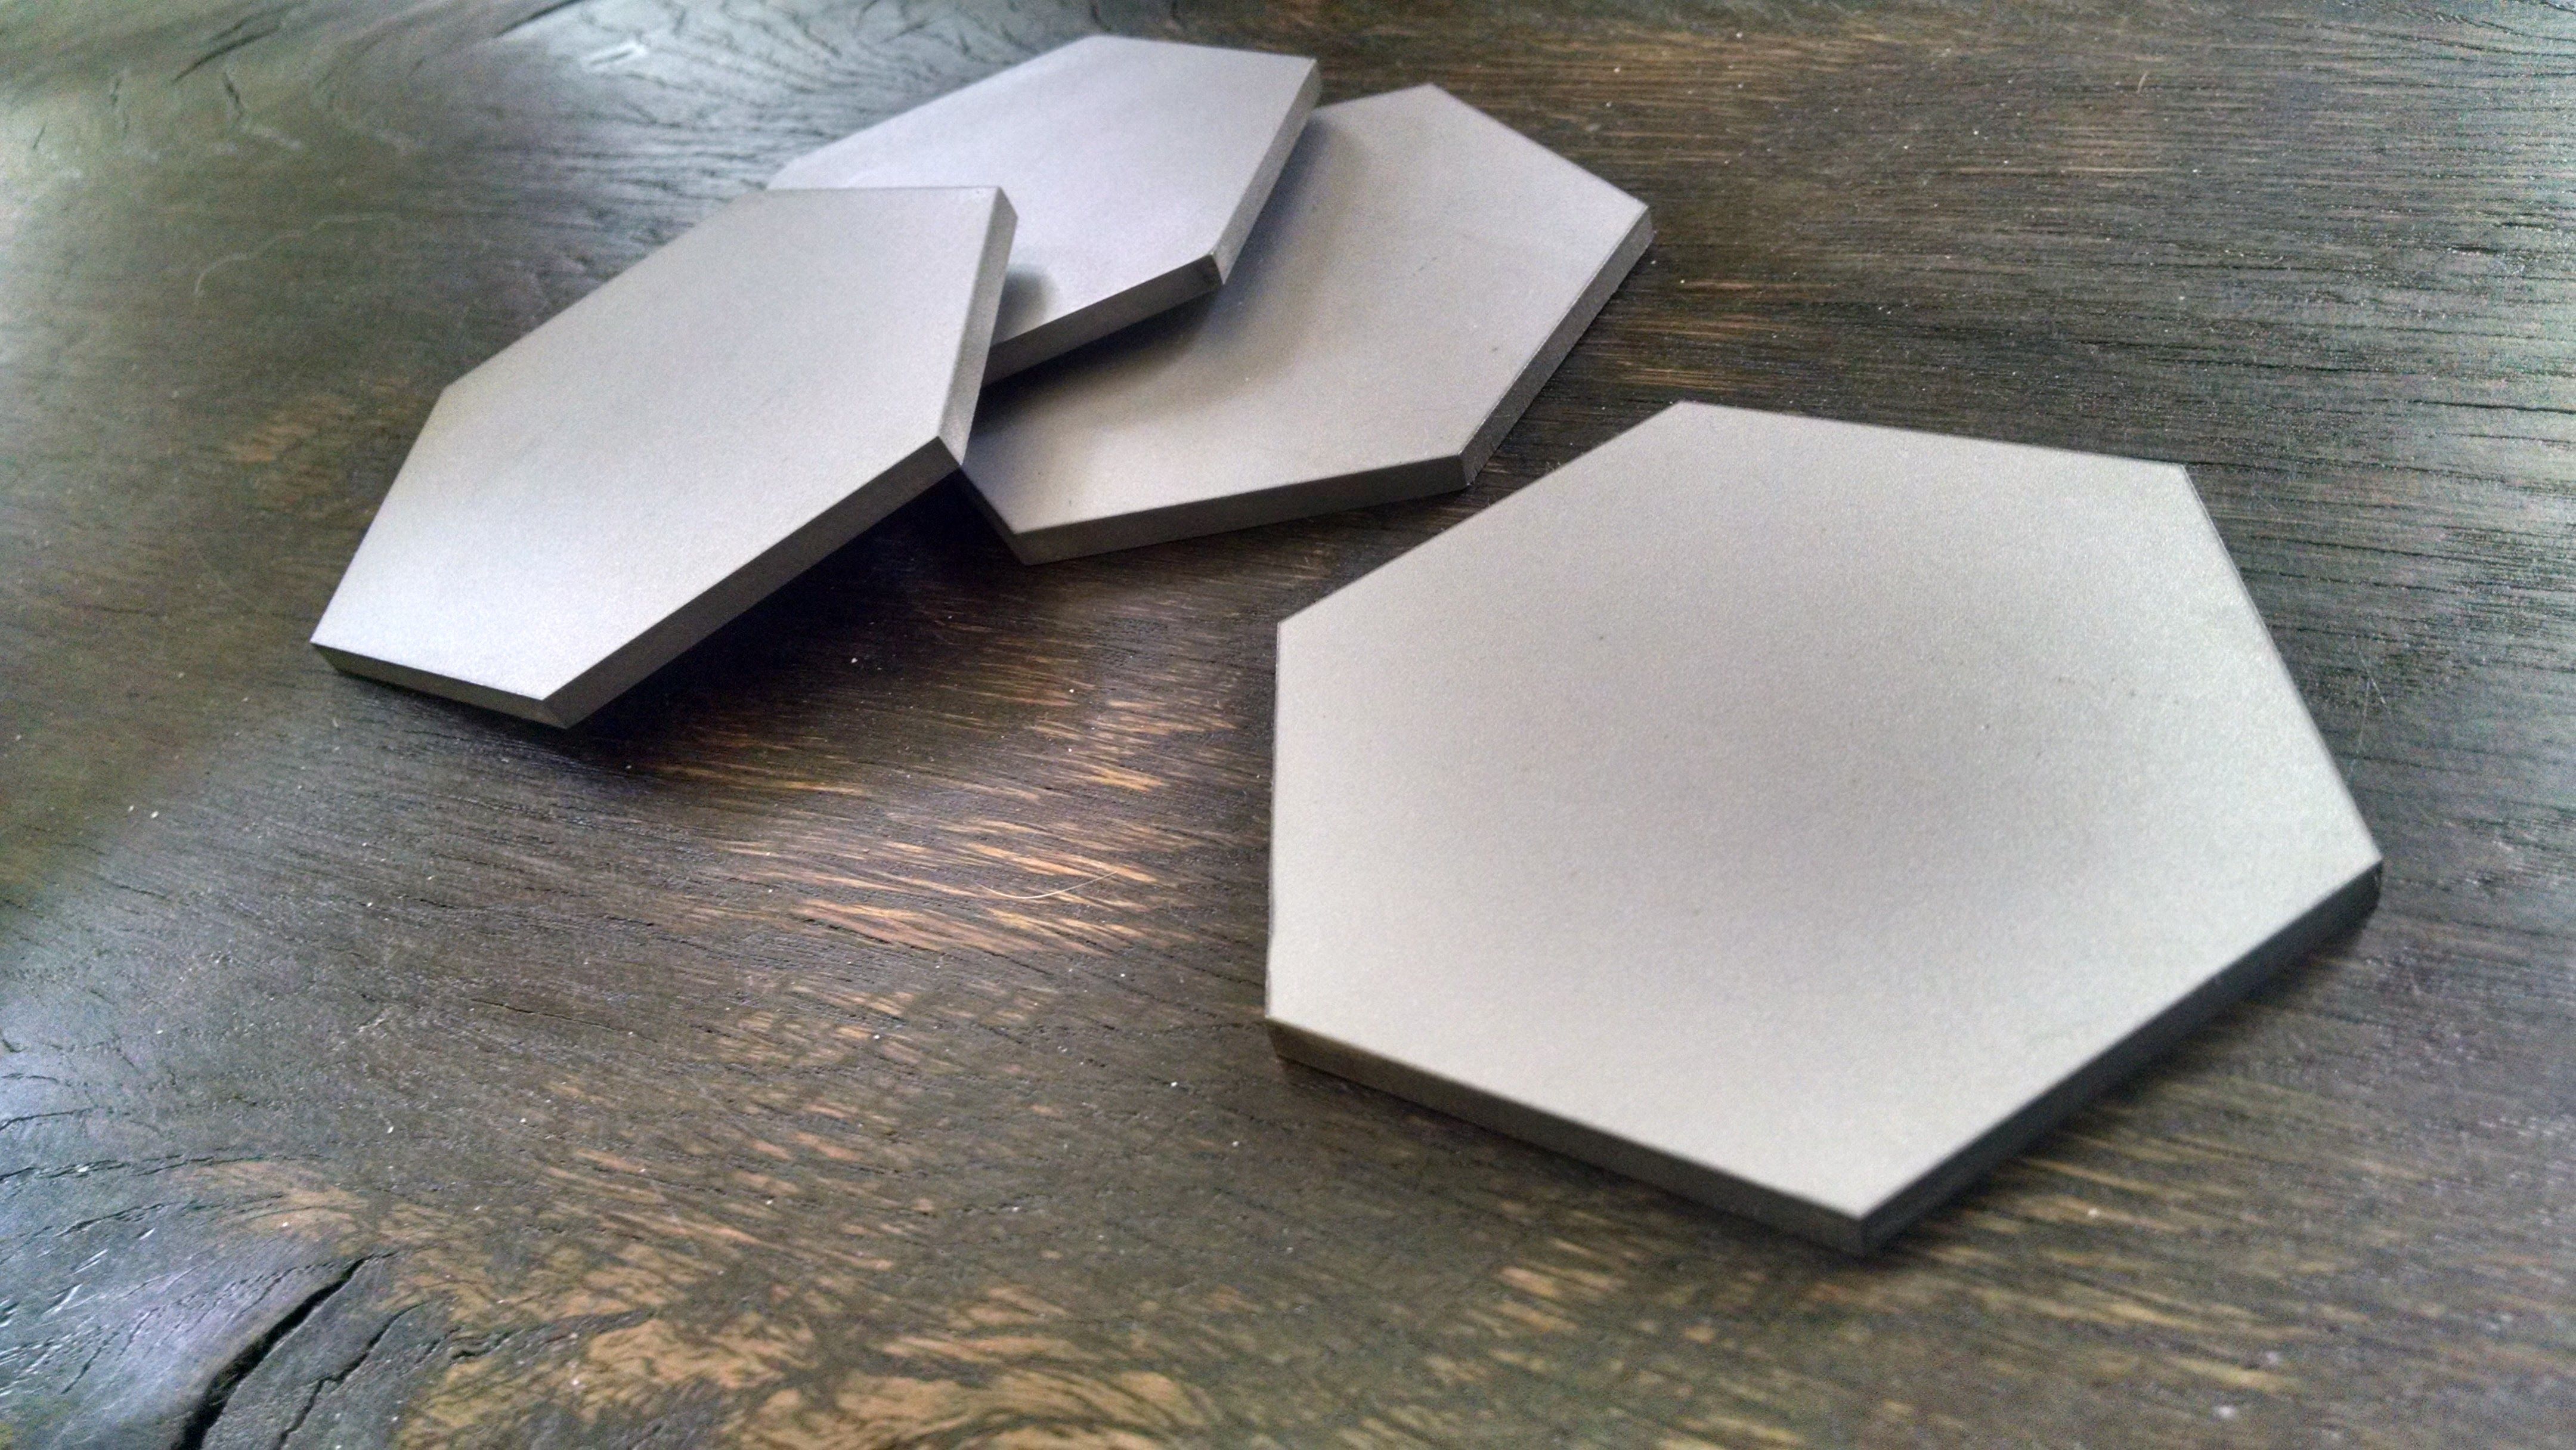 Buy Handmade Hexagonal Stainless Steel Coasters, made to order from Five Fork Studio